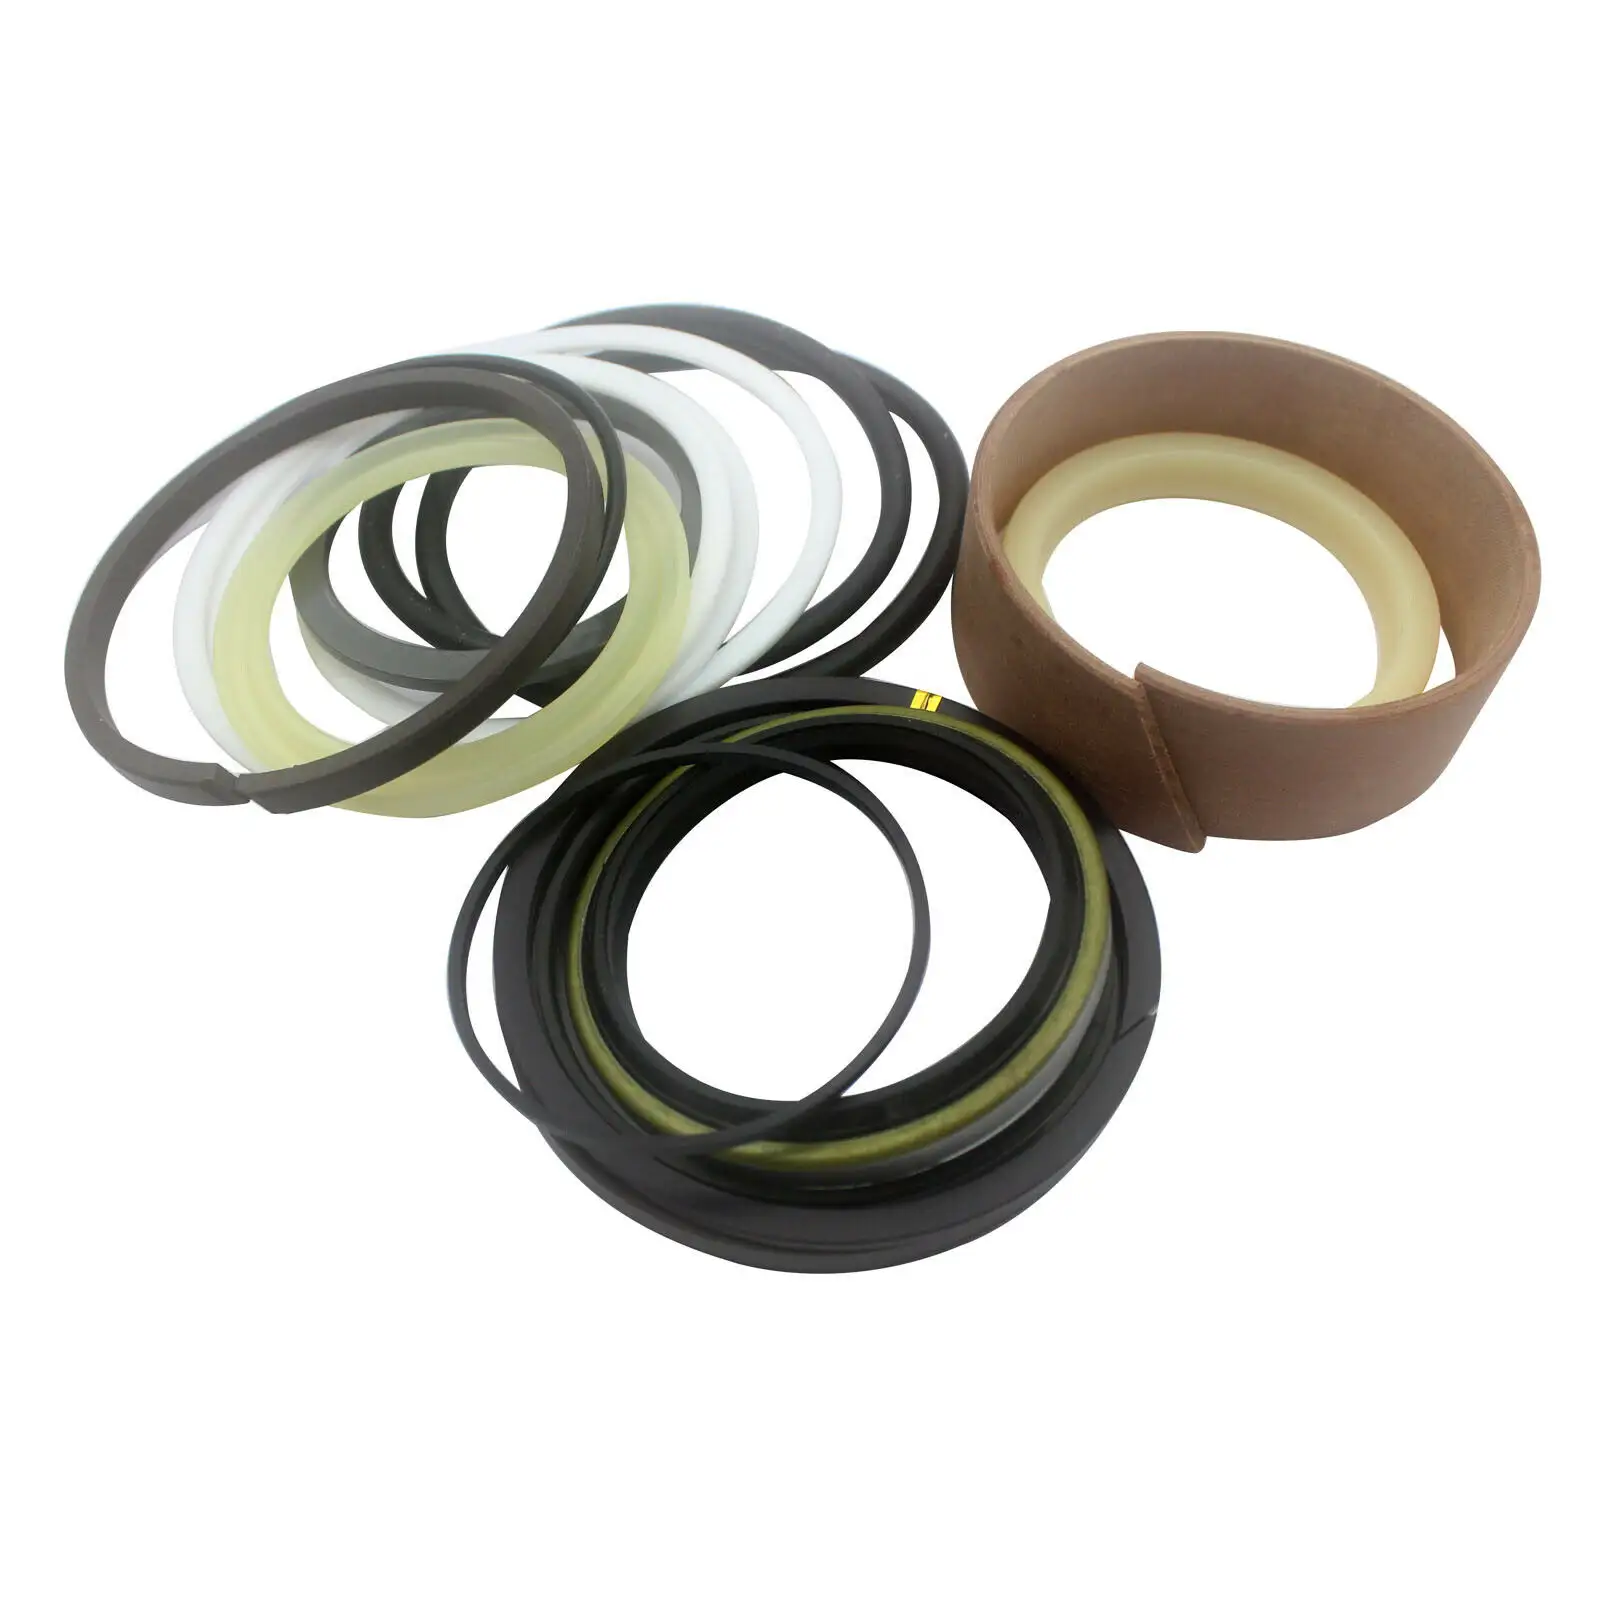 Professional Manufacturer Of High Quality hydraulic cylinder seal kits suppliers near me hydraulic ram seal replacement